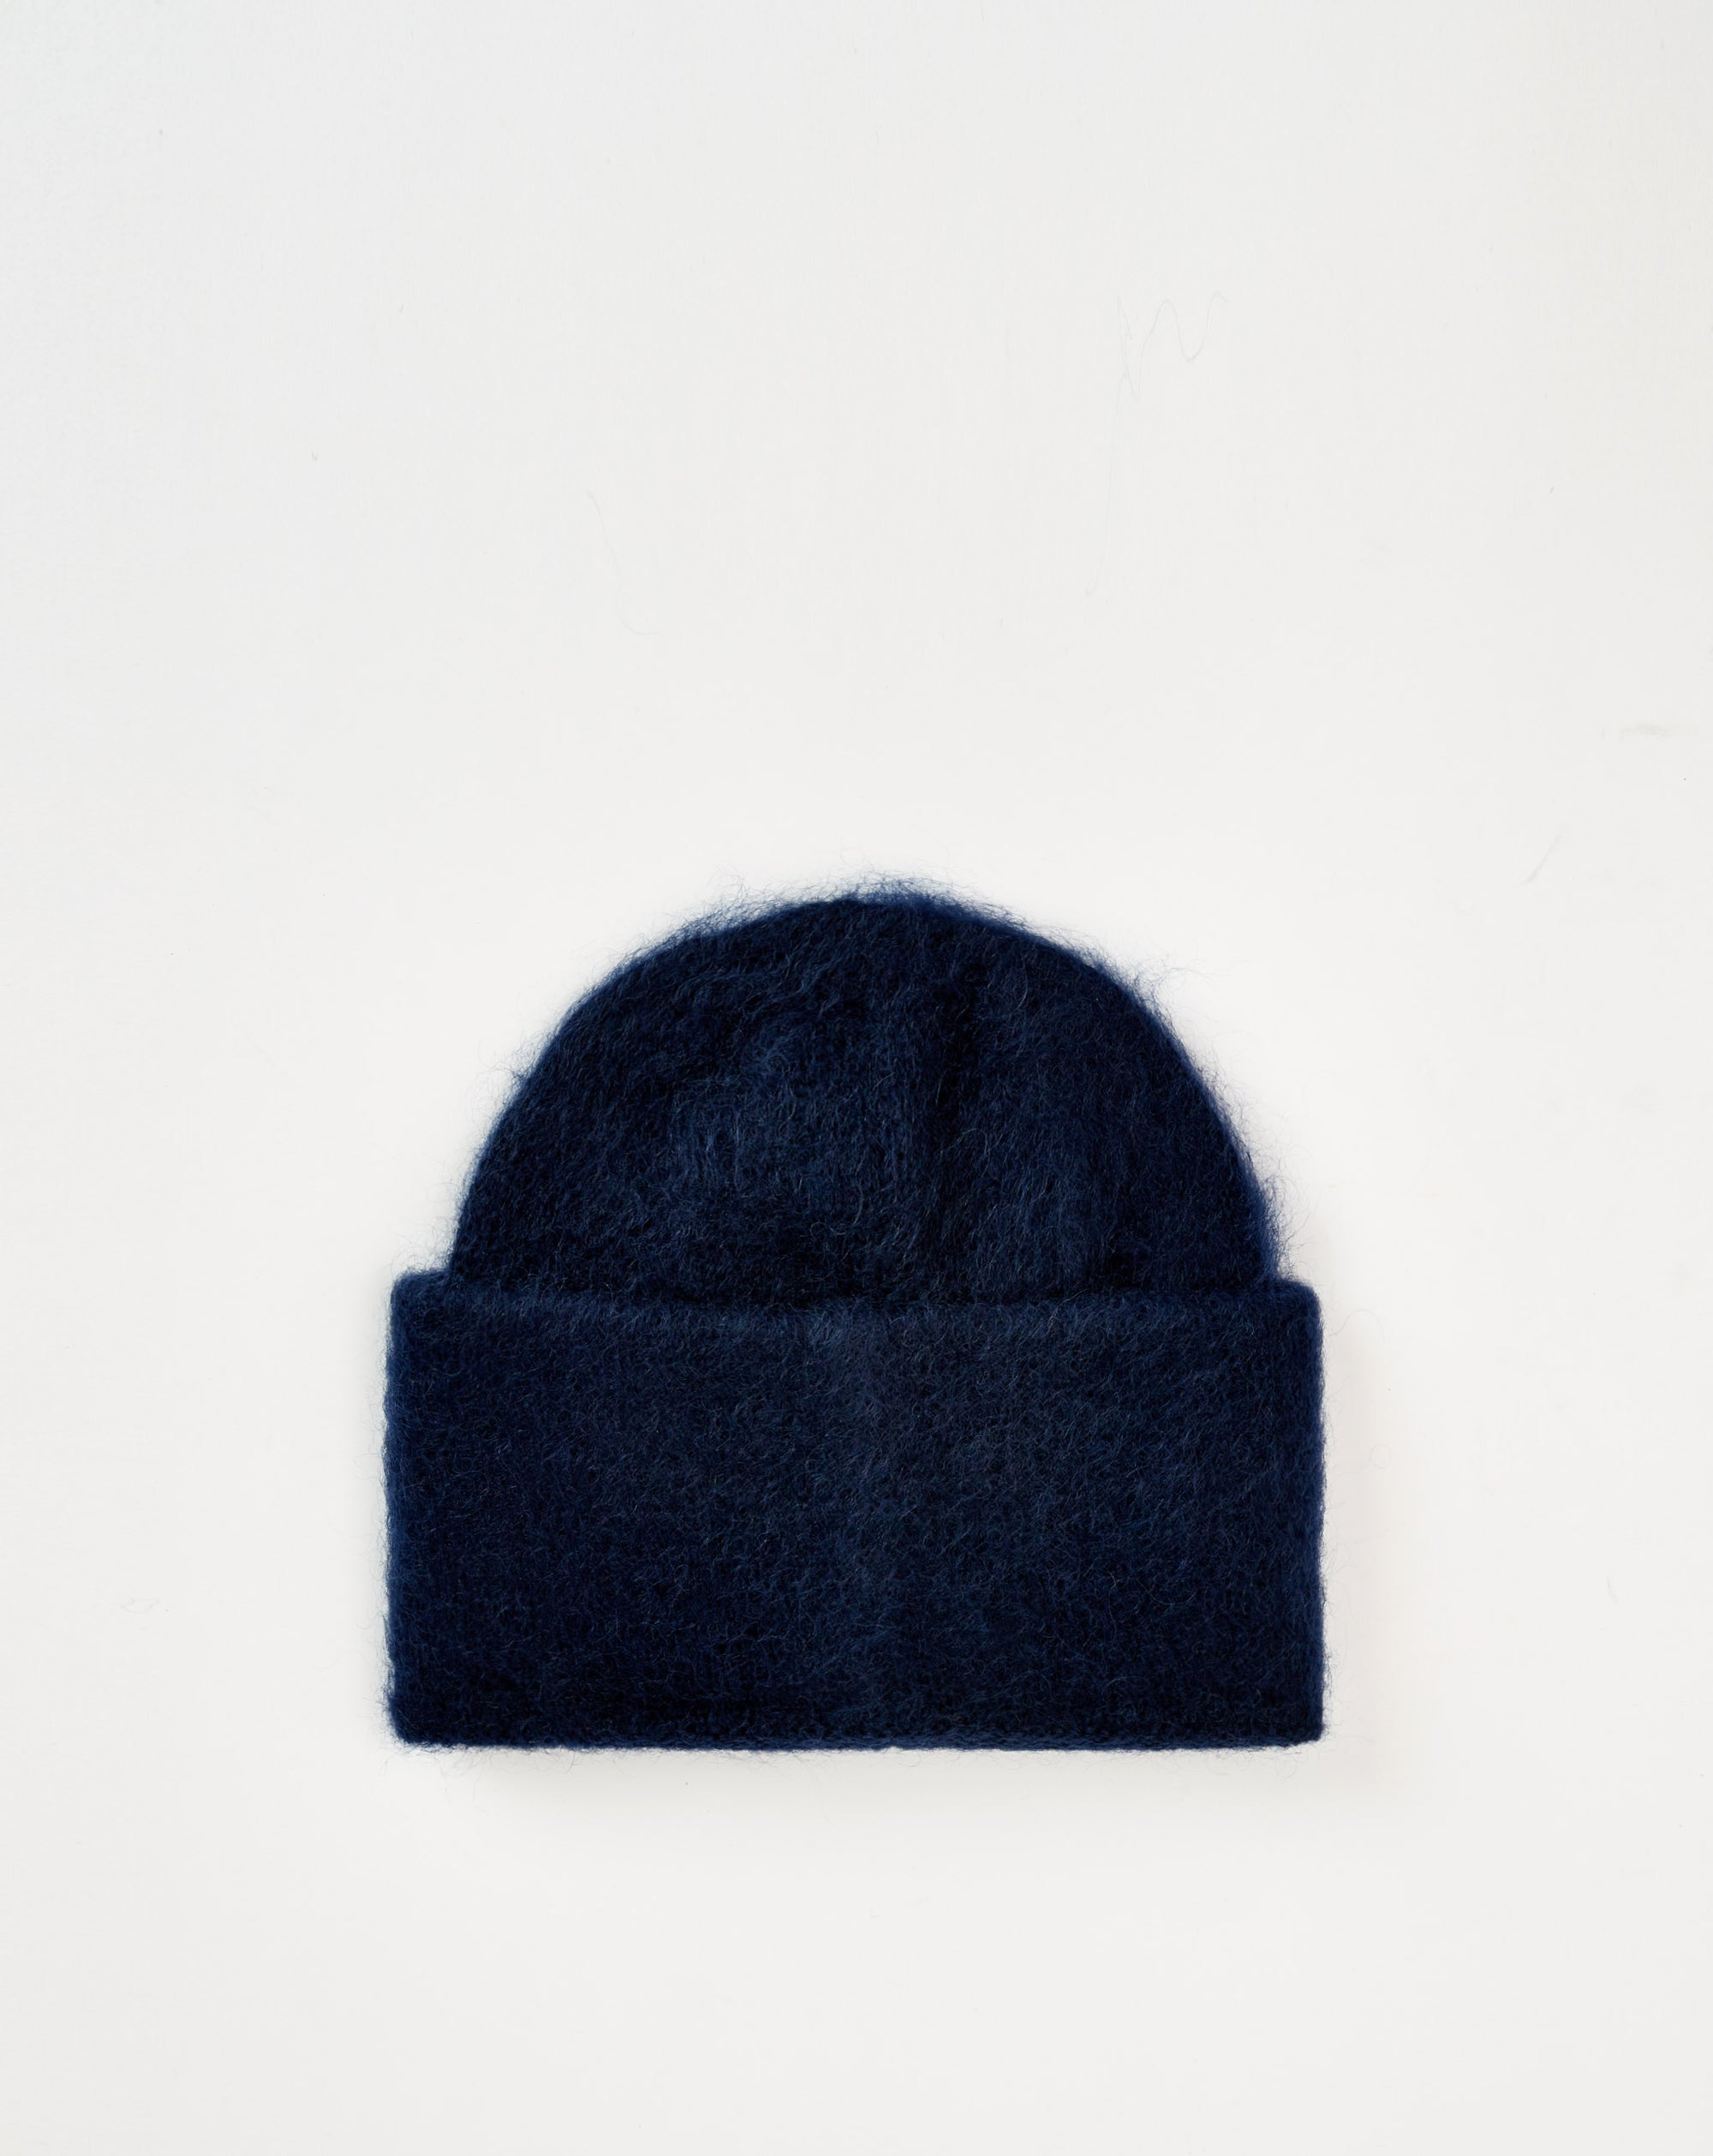 Off-White Arrow Patch Mohair Knit Beanie - Rule of Next Accessories